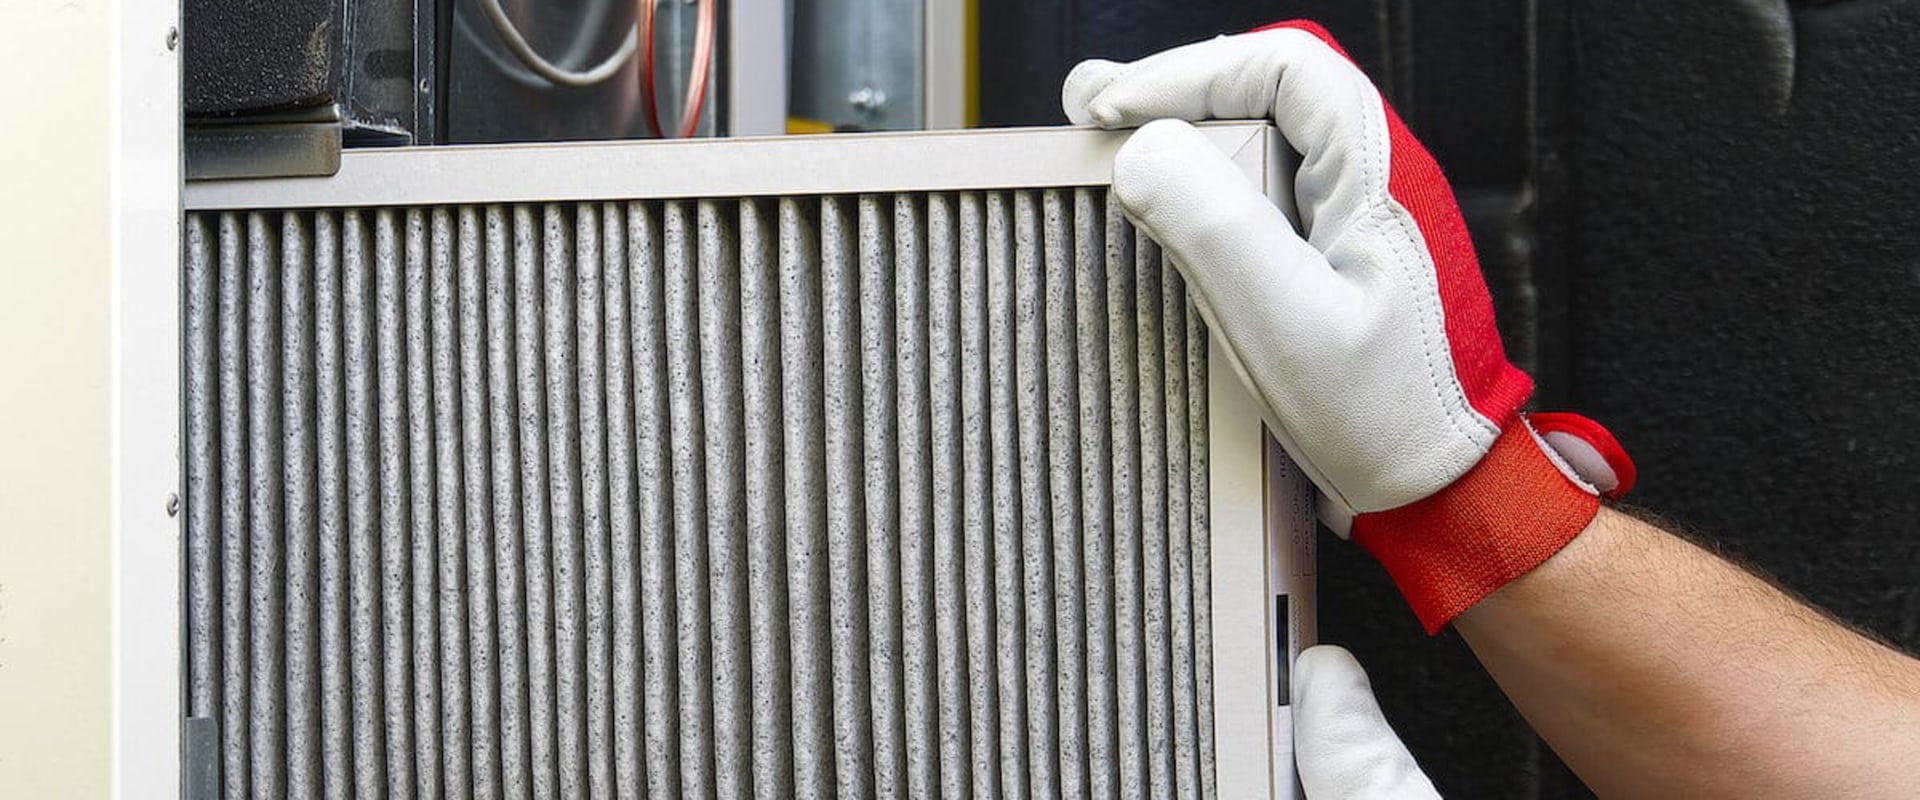 What Needs to Be Changed in HVAC Systems to Keep Them Running Efficiently?